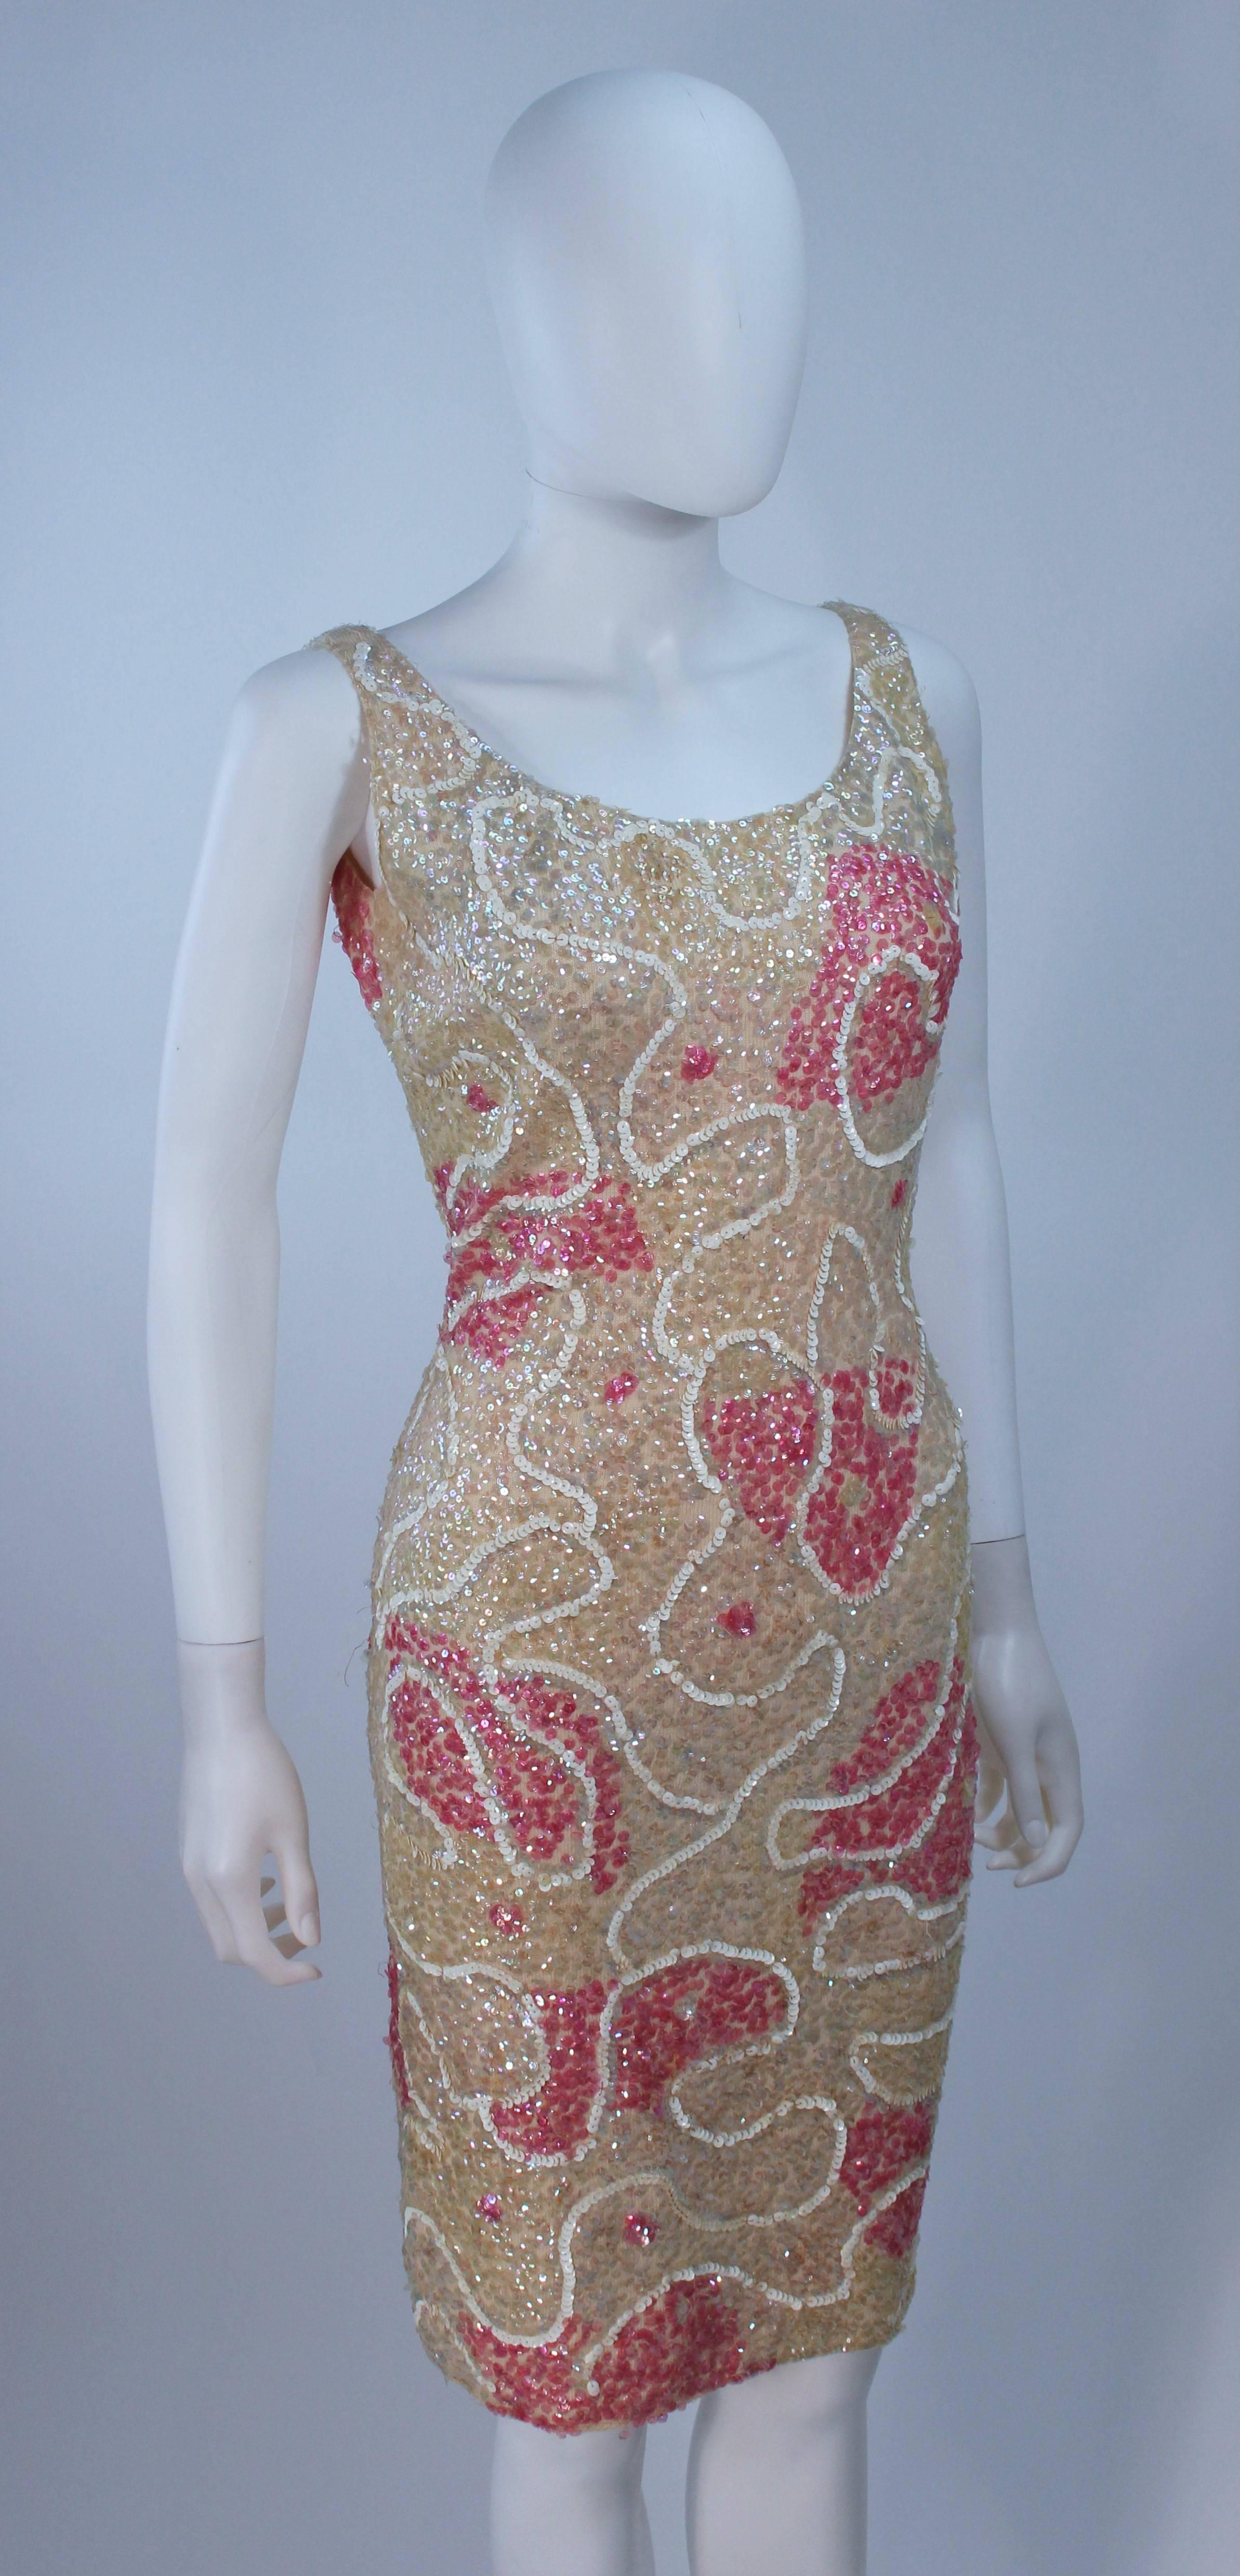 Brown GENE SHELLY'S BOUTIQUE INTERNATIONAL Stretch Sequined Cocktail Dress Size 6-8 For Sale